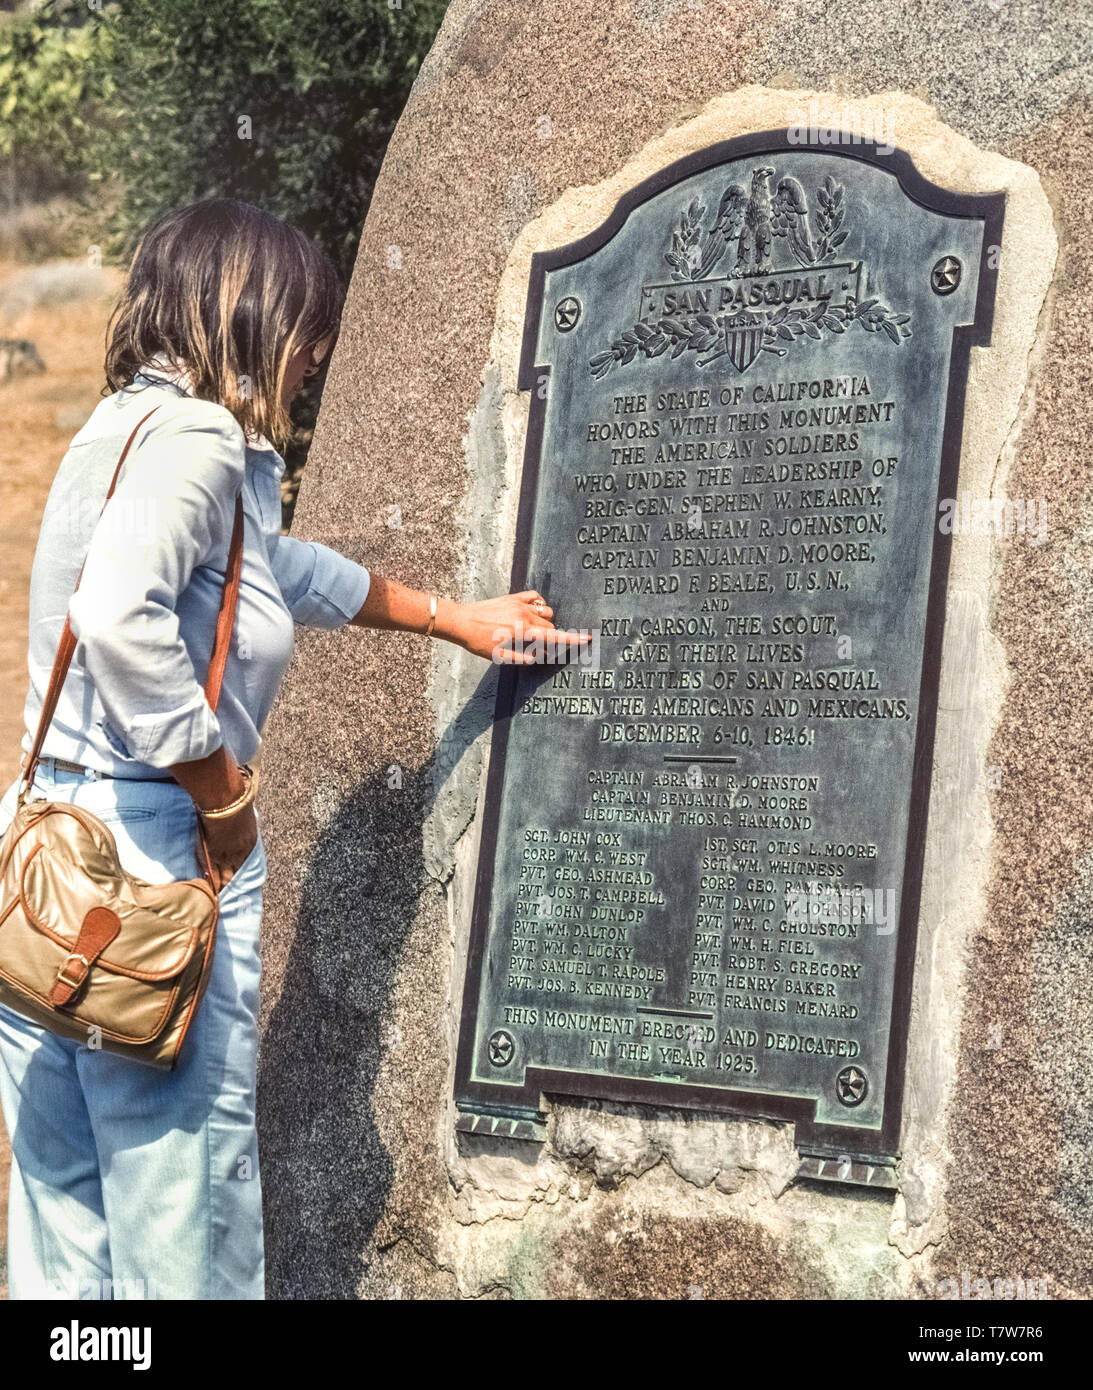 The 21 American military men who died in the bloodiest battle fought in California during the U.S.-Mexican War are honored with this bronze plaque at the 1846 battle site that is now the San Pasquel Battlefield State Park in San Diego County, USA.  A female visitor points to the name of Kit Carson, a legend of the Old West, who served as scout for the American soldiers. The U.S. troops were trying to take control of California from the Mexicans, known as Californios, who were people of Hispanic descent living in California after Mexico’s War of Independence from Spain between 1810-1821. Stock Photo